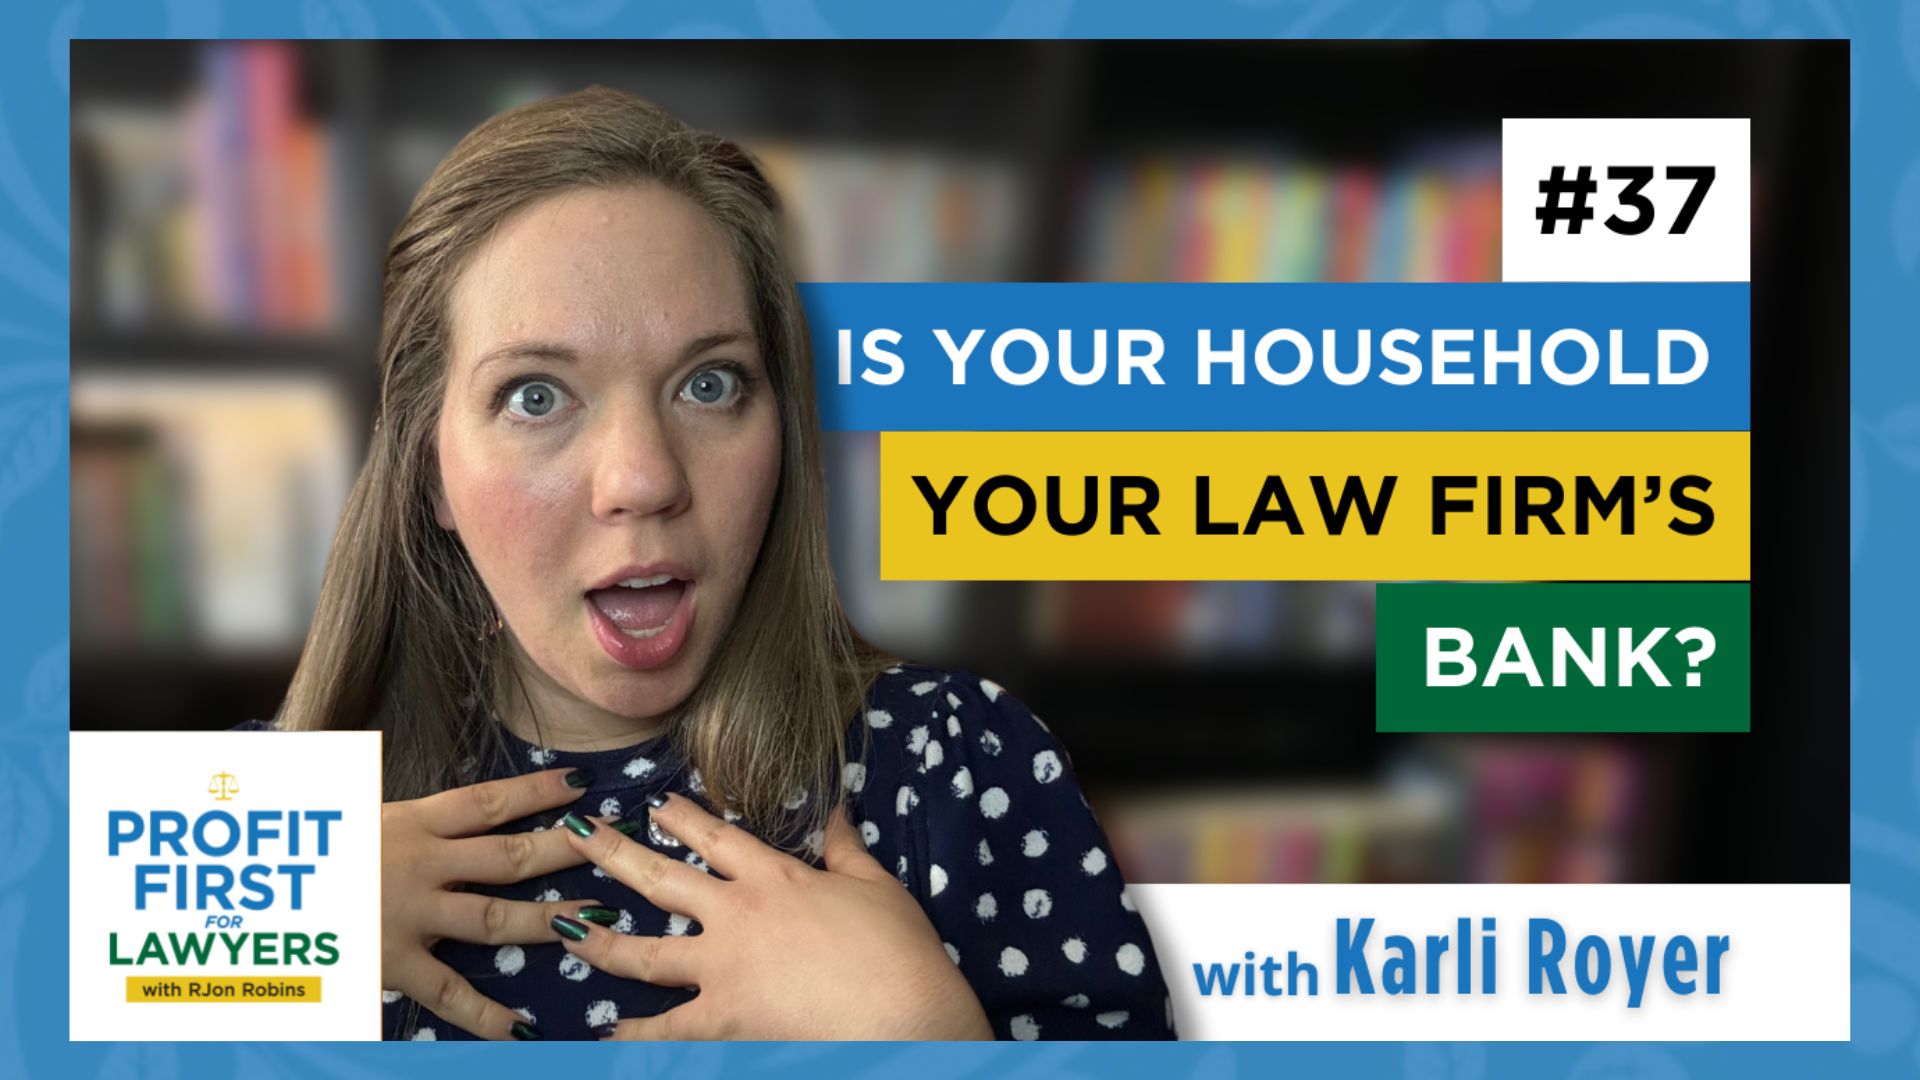 Episode 37 featured image of podcast host, Karli Royer looking aghast. Title of episode, "Is Your Household Your Law Firm's Bank?" and Profit First For Lawyers logo.